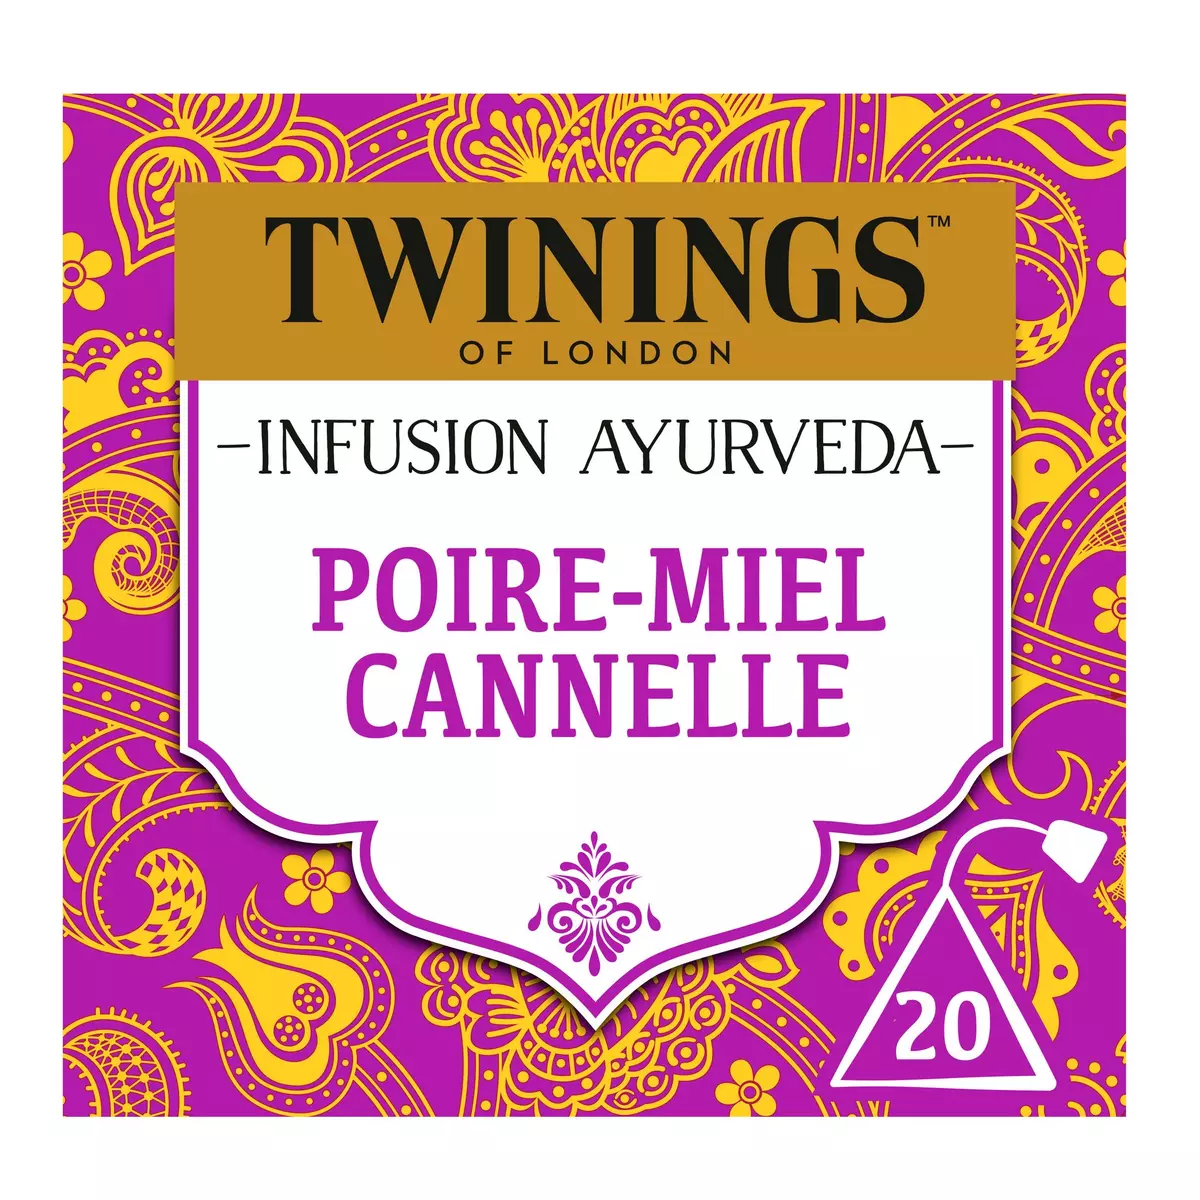 TWININGS Infusion Ayurveda poire miel et cannelle 20 sachets 36g